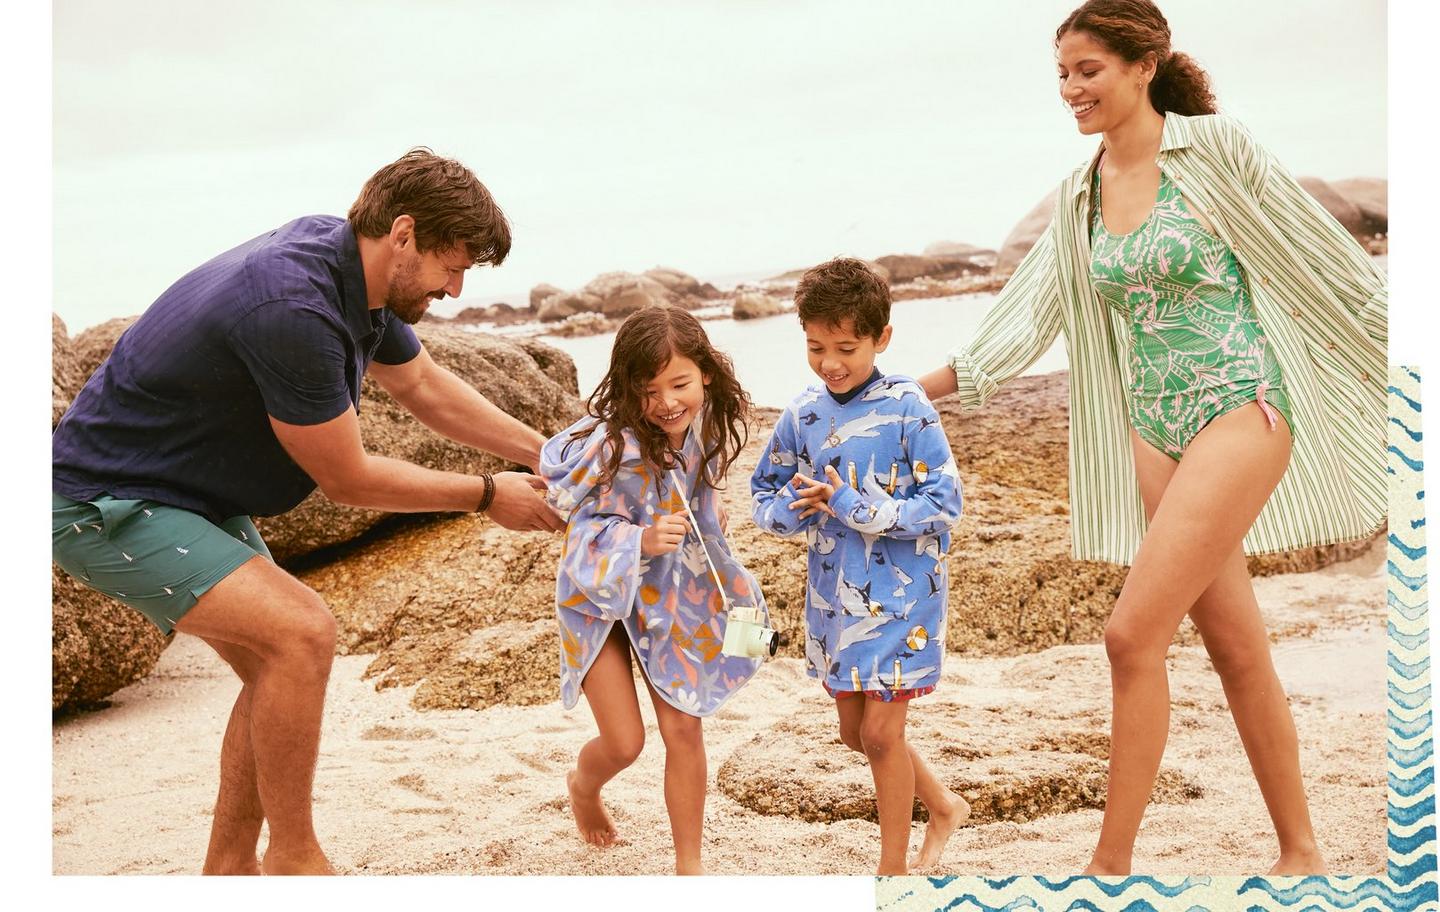 A family on the beach; the adults dressed in summer shirts & swimwear, the kids with towel ponchos over swimwear.